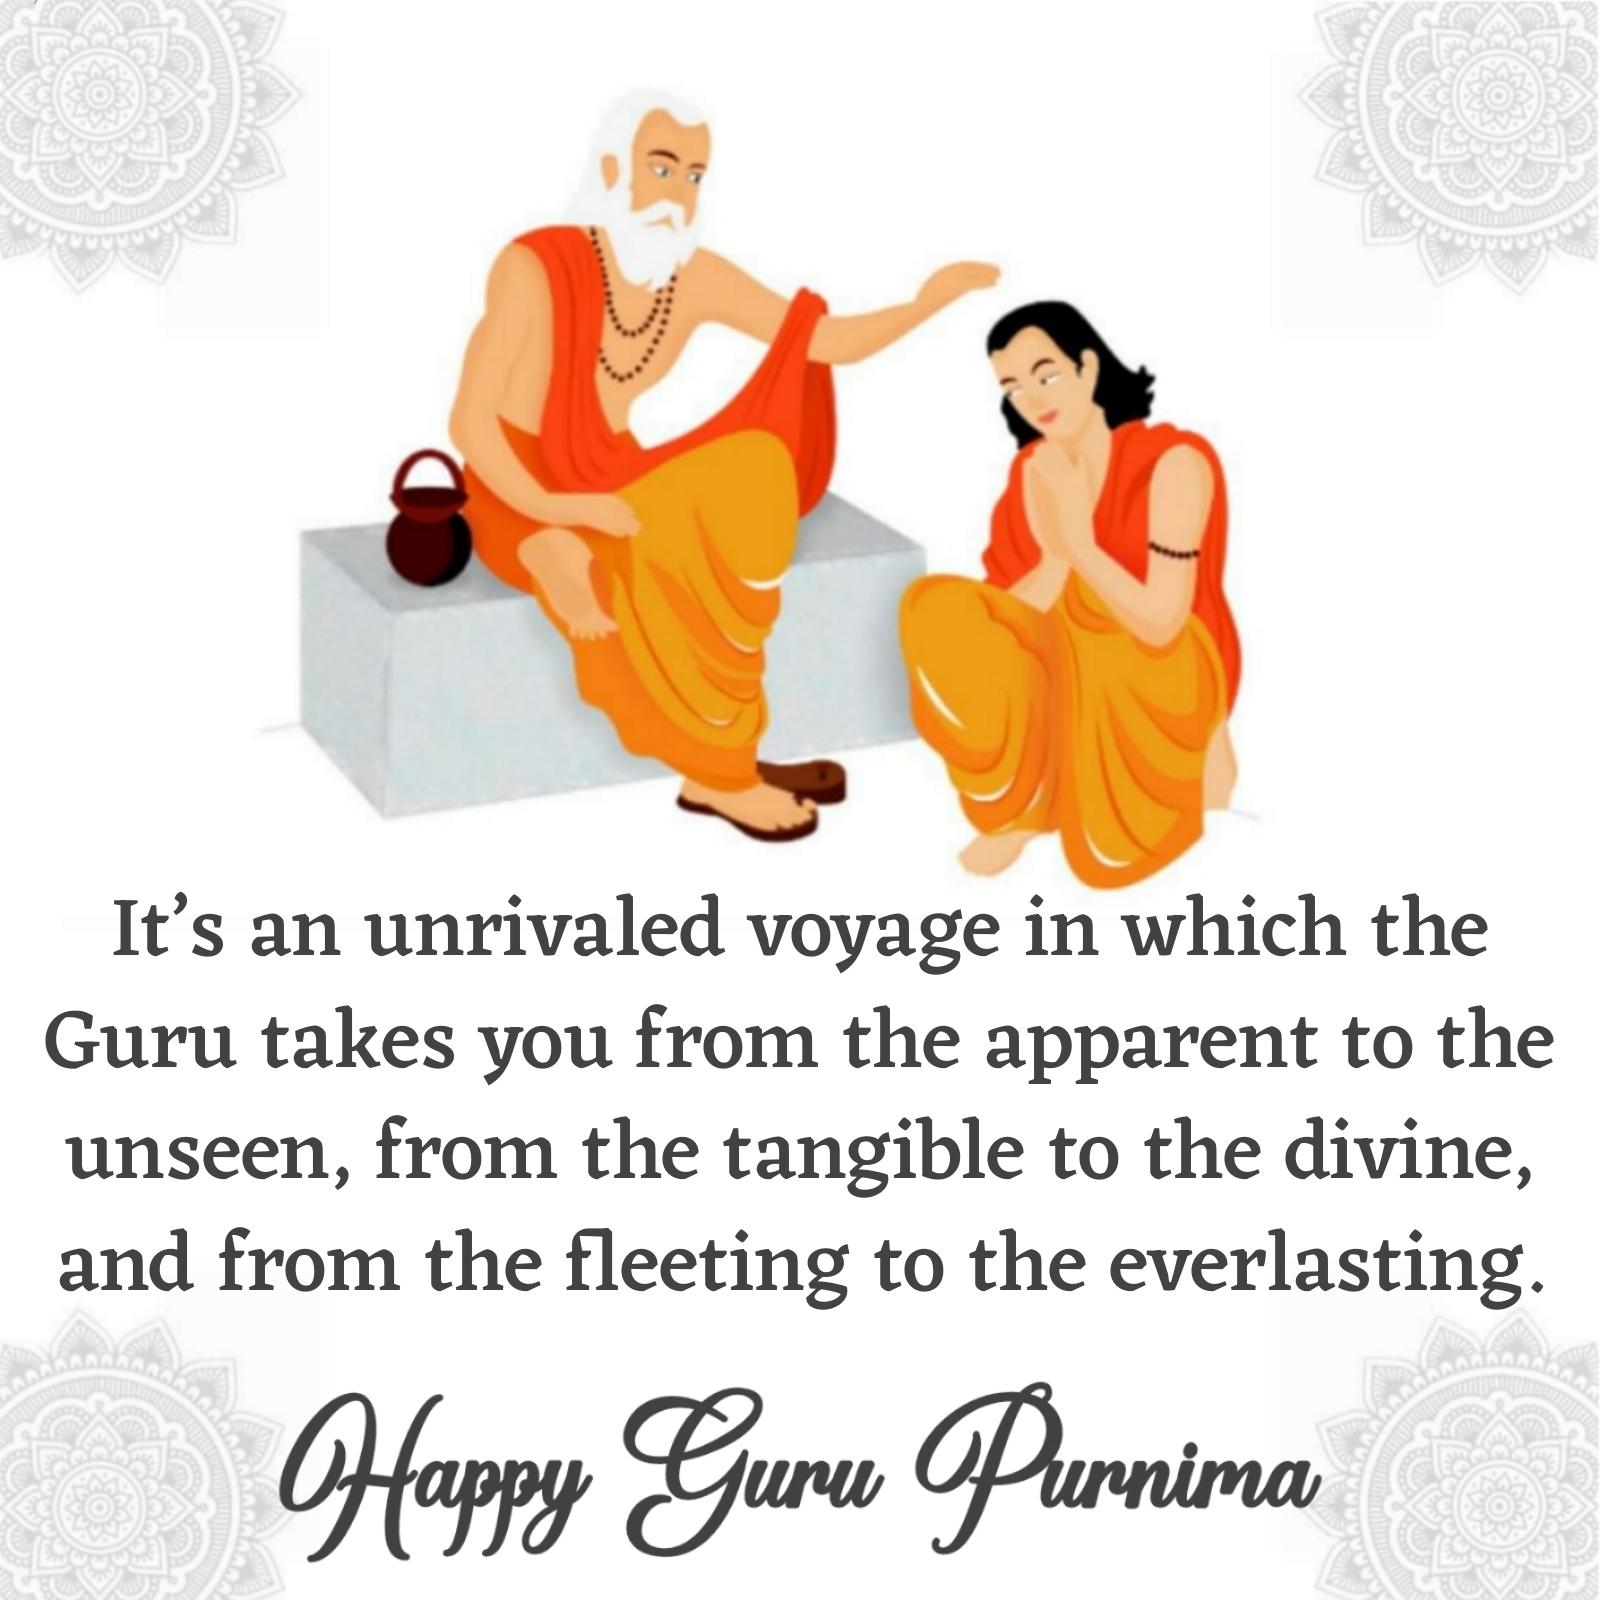 Its an unrivaled voyage in which the Guru takes you from the apparent to the unseen